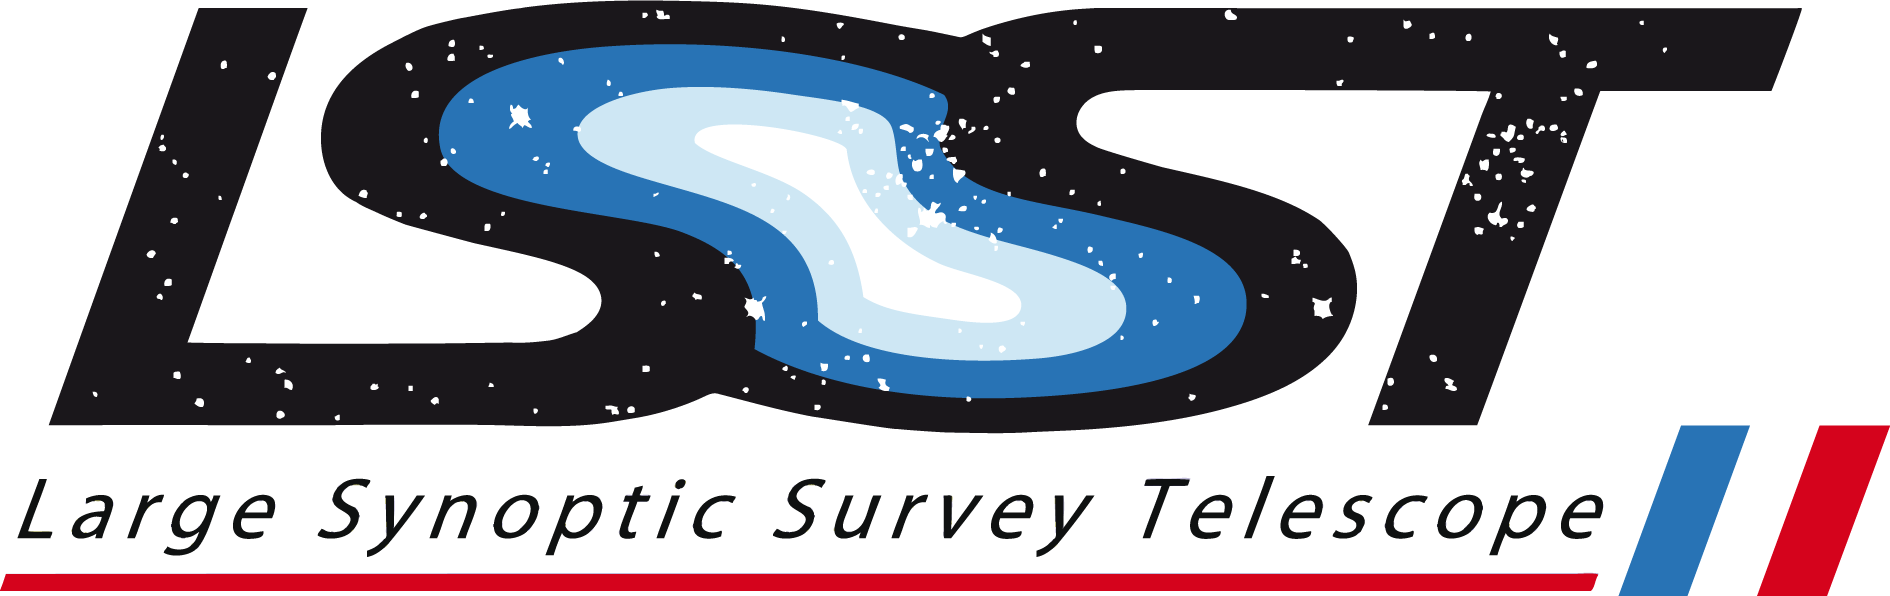 galaxy clipart science subject